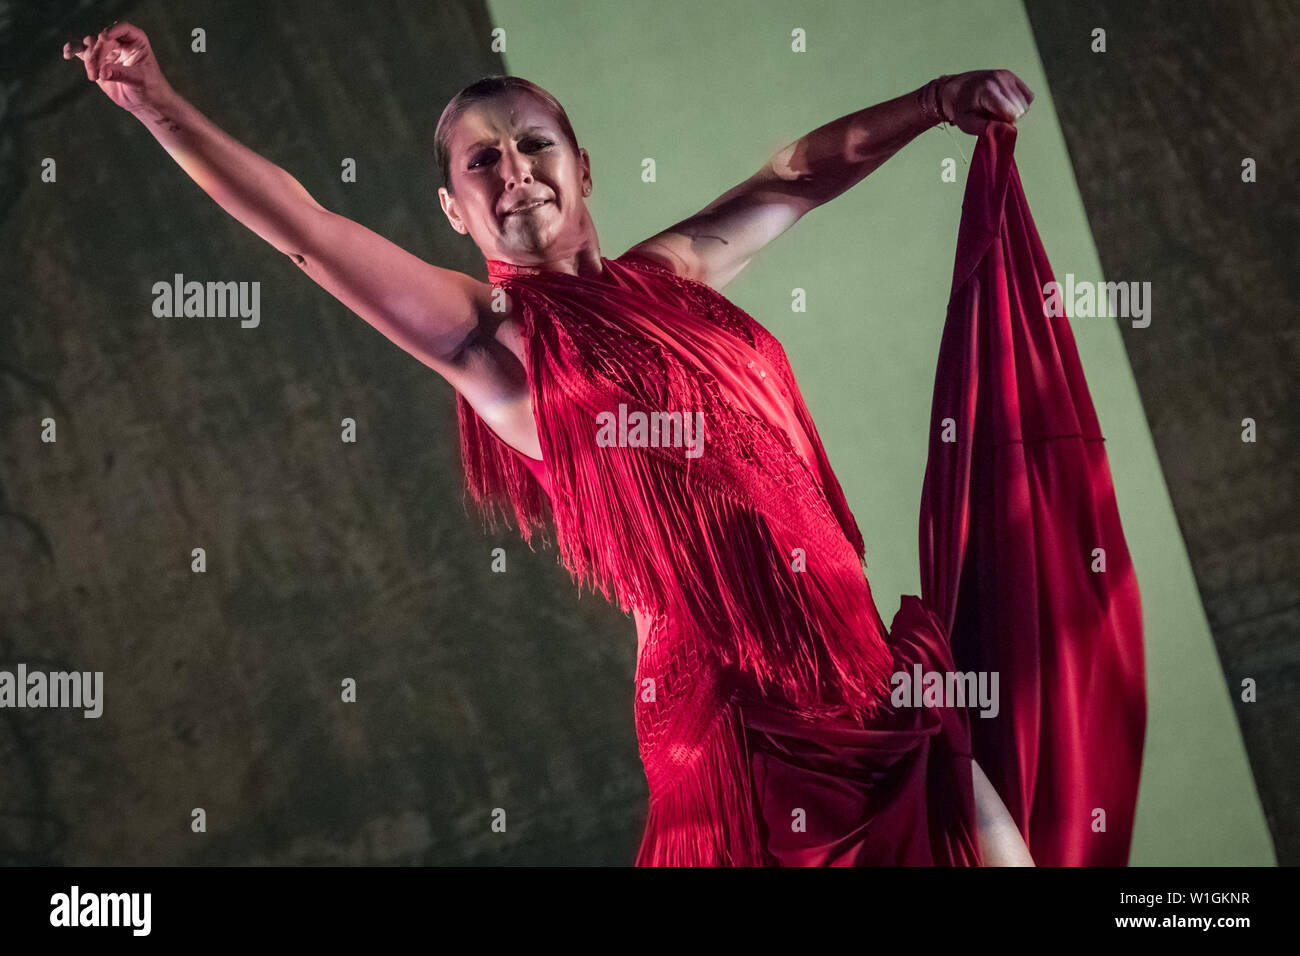 London, UK. 2nd July, 2019. Revolutionary dancer and flamenco legend Sara Baras returns to Sadler’s Wells Theatre opening the 16th Flamenco Festival with ‘Sombras’ (Shadows) which draws on the dance form that has woven through her career, La Farruca. Renowned for its dramatic fast-footwork usually performed by men, Sara Baras dances La Farruca alongside six dancers to claim the dance form as her own. Credit: Guy Corbishley/Alamy Live News Stock Photo